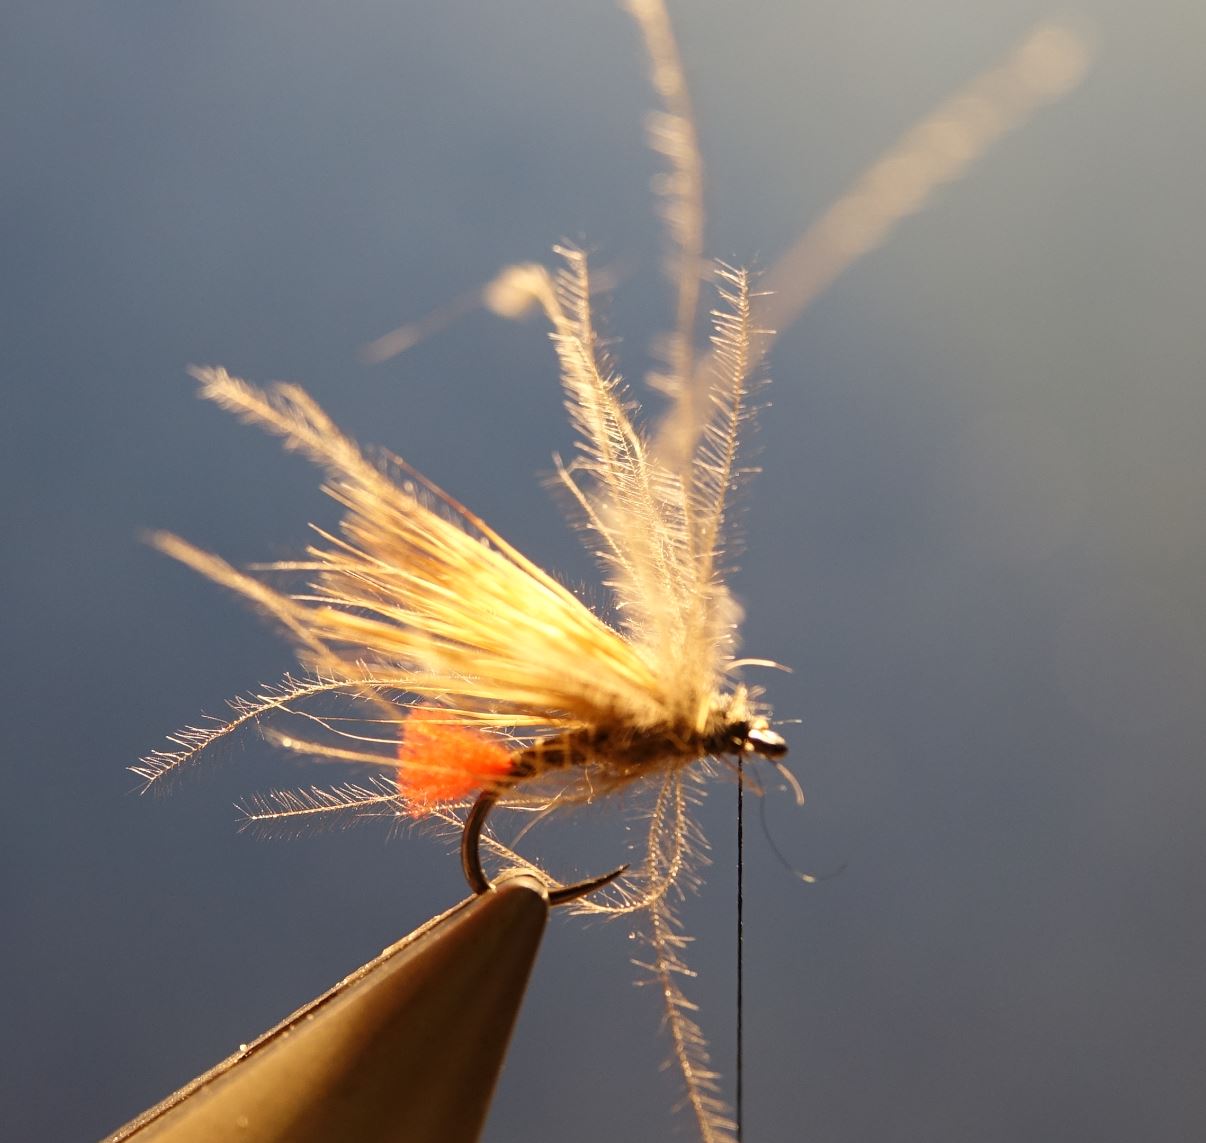 Sedge tag rouge chevreuil roe deer mouche fly tying eclosion 1